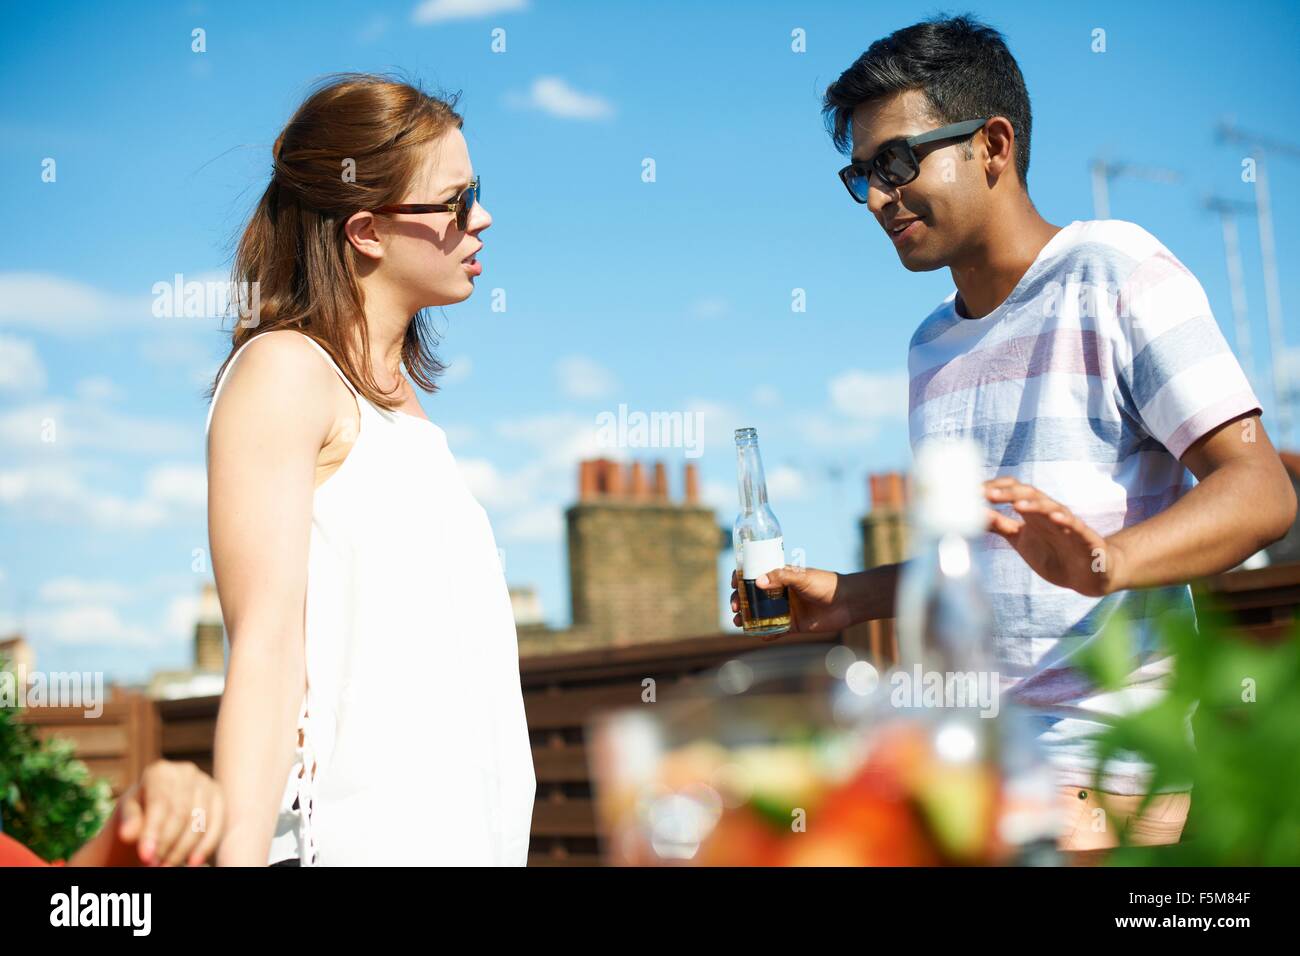 Couple chatting and drinking beer at rooftop party Stock Photo